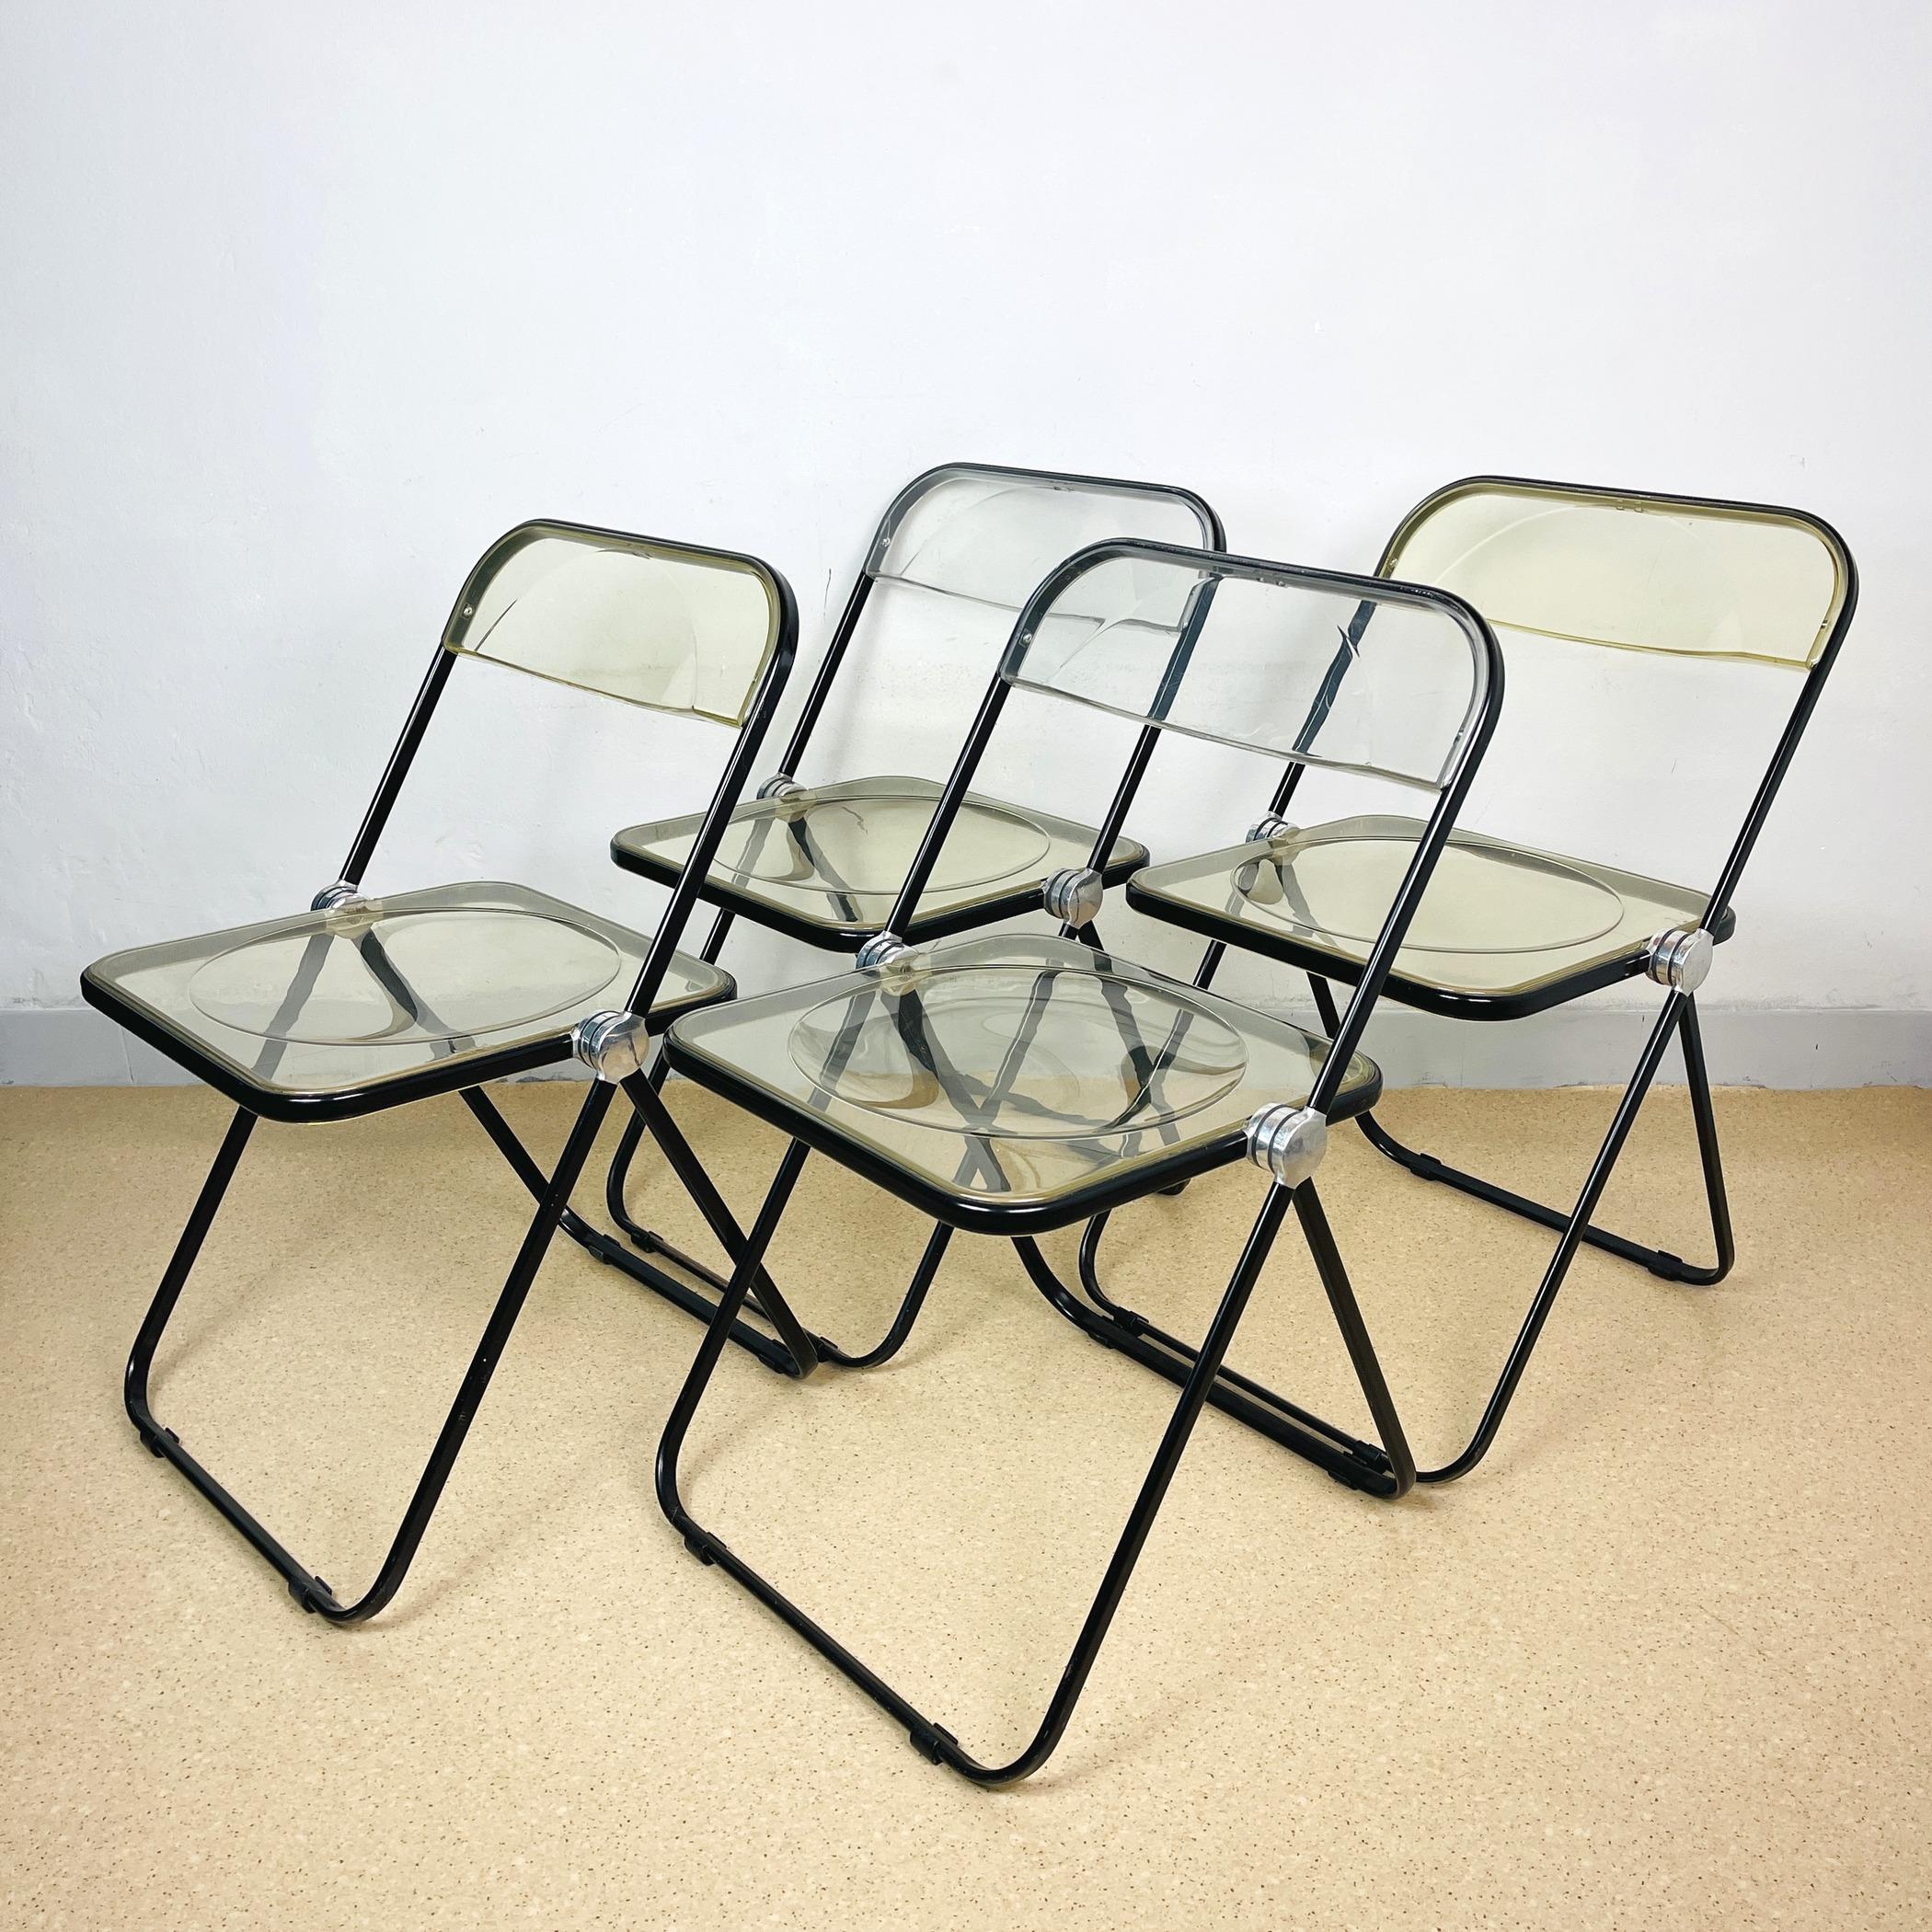 Set of 4 mid-century dining chairs Plia by Giancarlo Piretti for Castelli made in Italy in the 1970s.
The Plia folding chair is a striking example of Italian minimalism of the middle of the last century and was designed by the designer Giancarlo